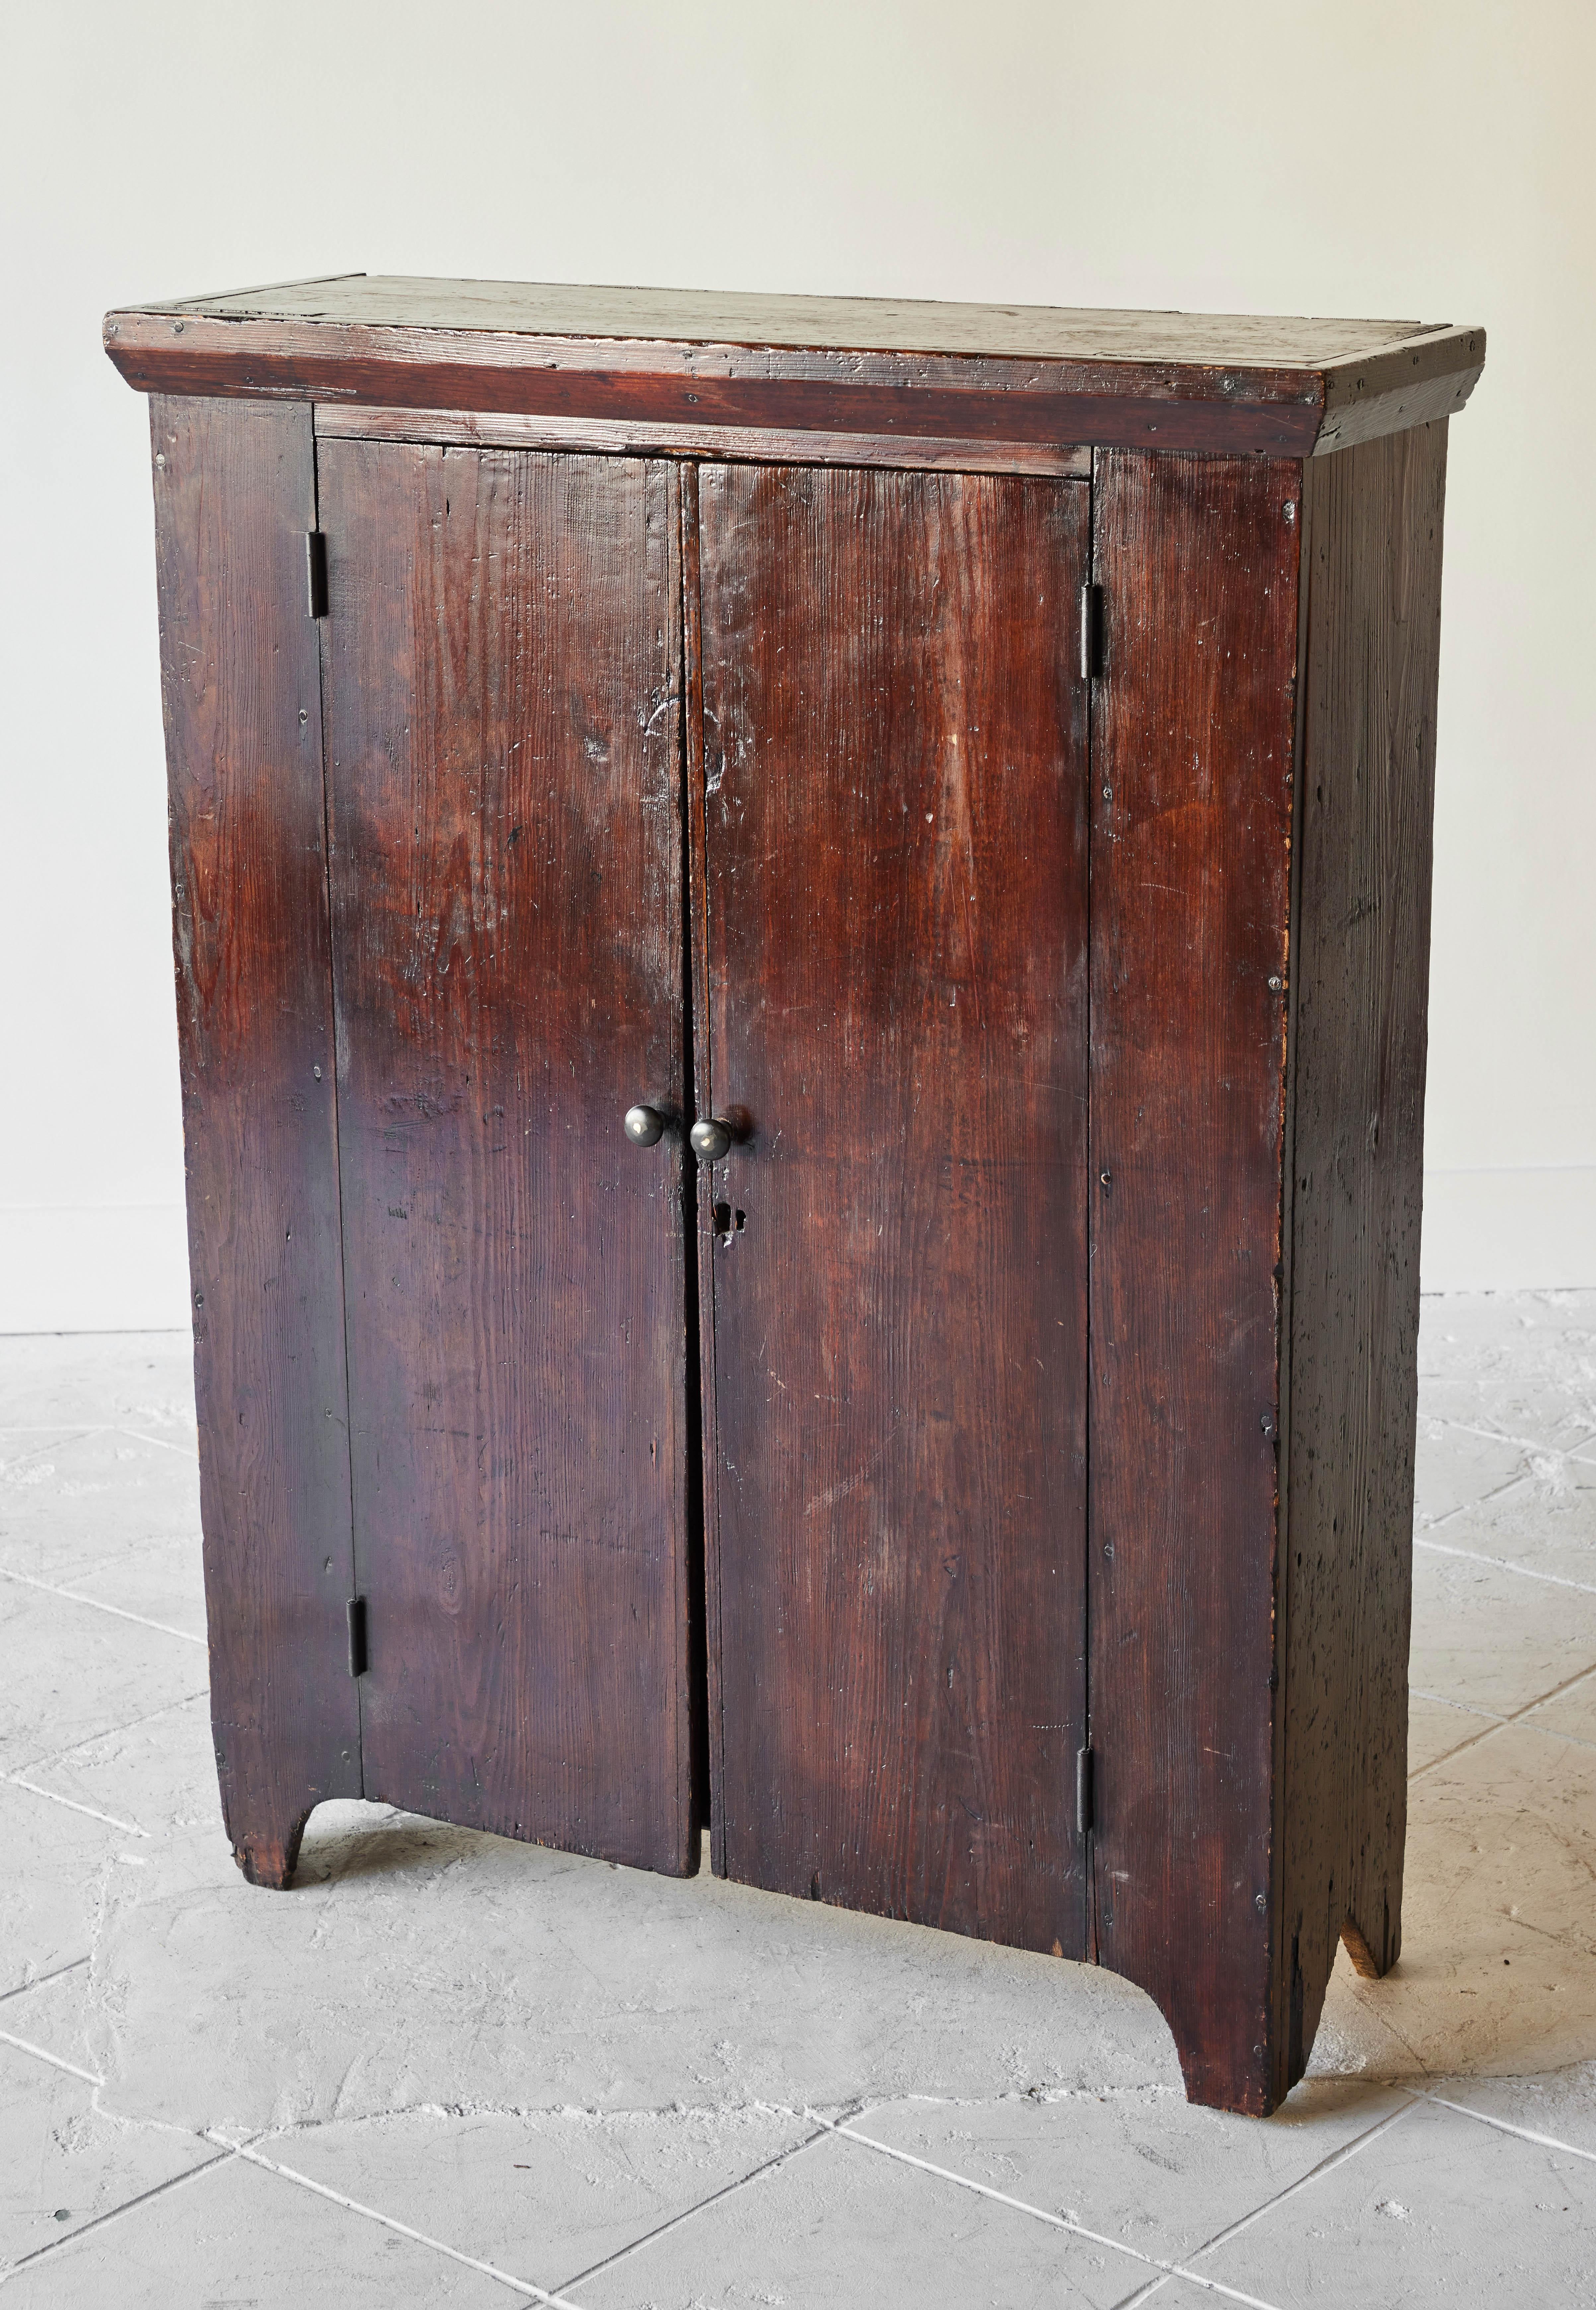 Wood Early American Two-Door Cabinet